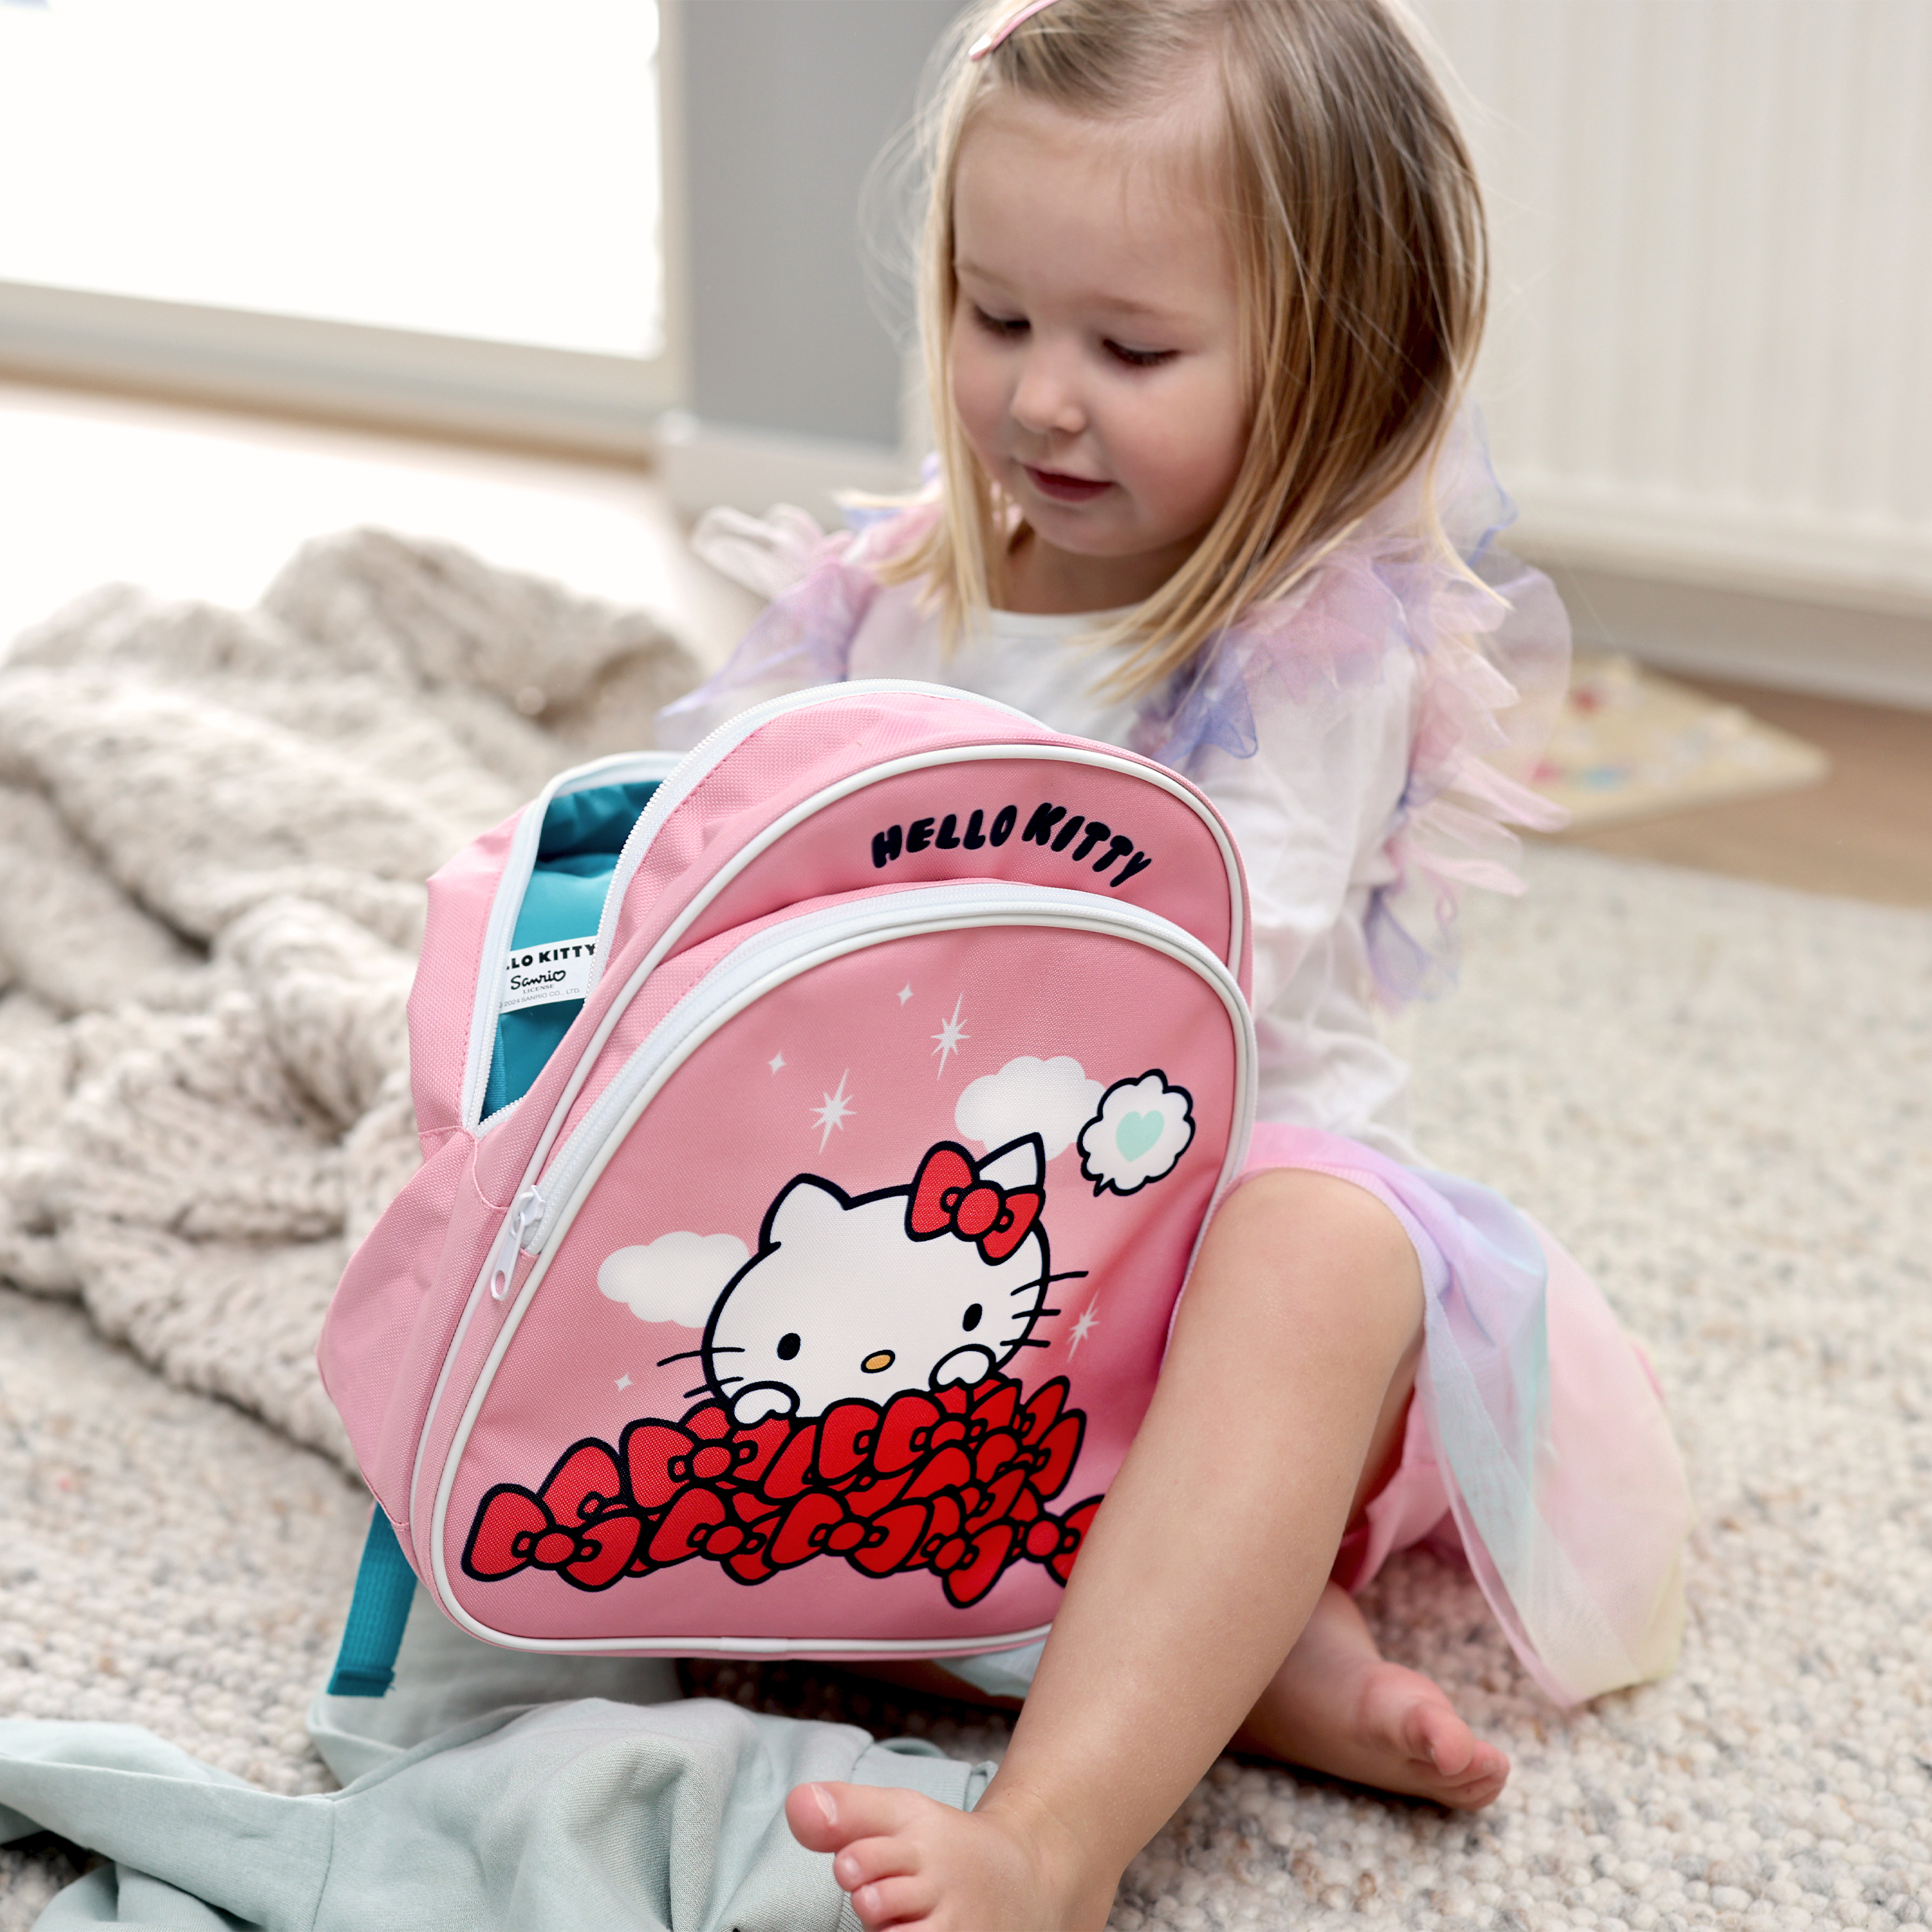 Hello Kitty and Friends hello kitty kids bag backpack